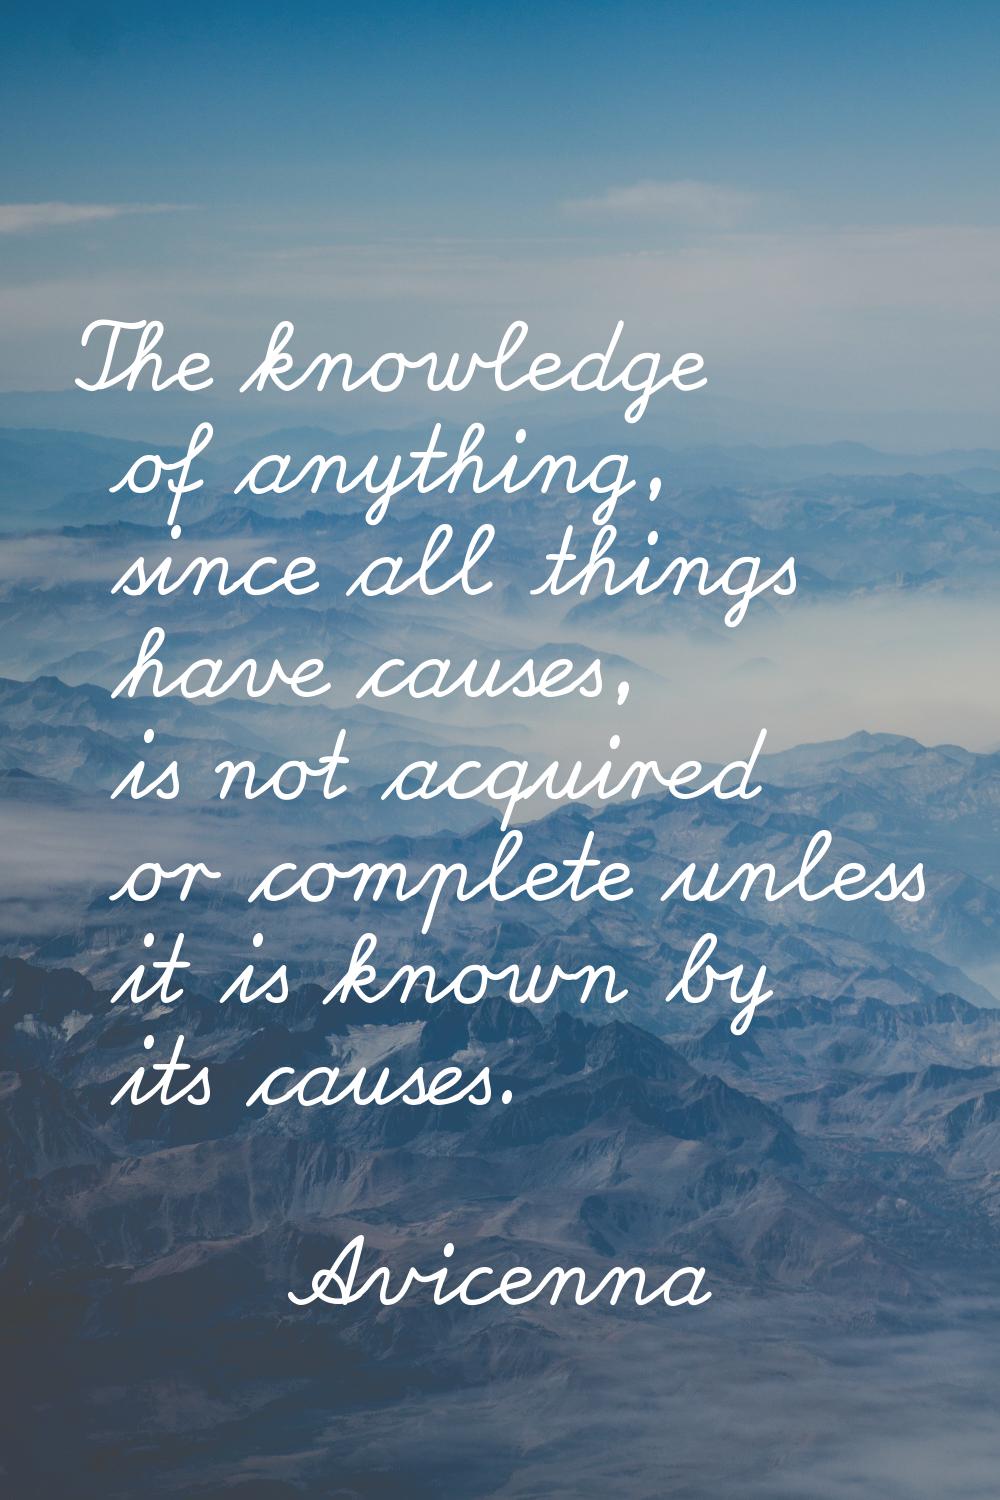 The knowledge of anything, since all things have causes, is not acquired or complete unless it is k